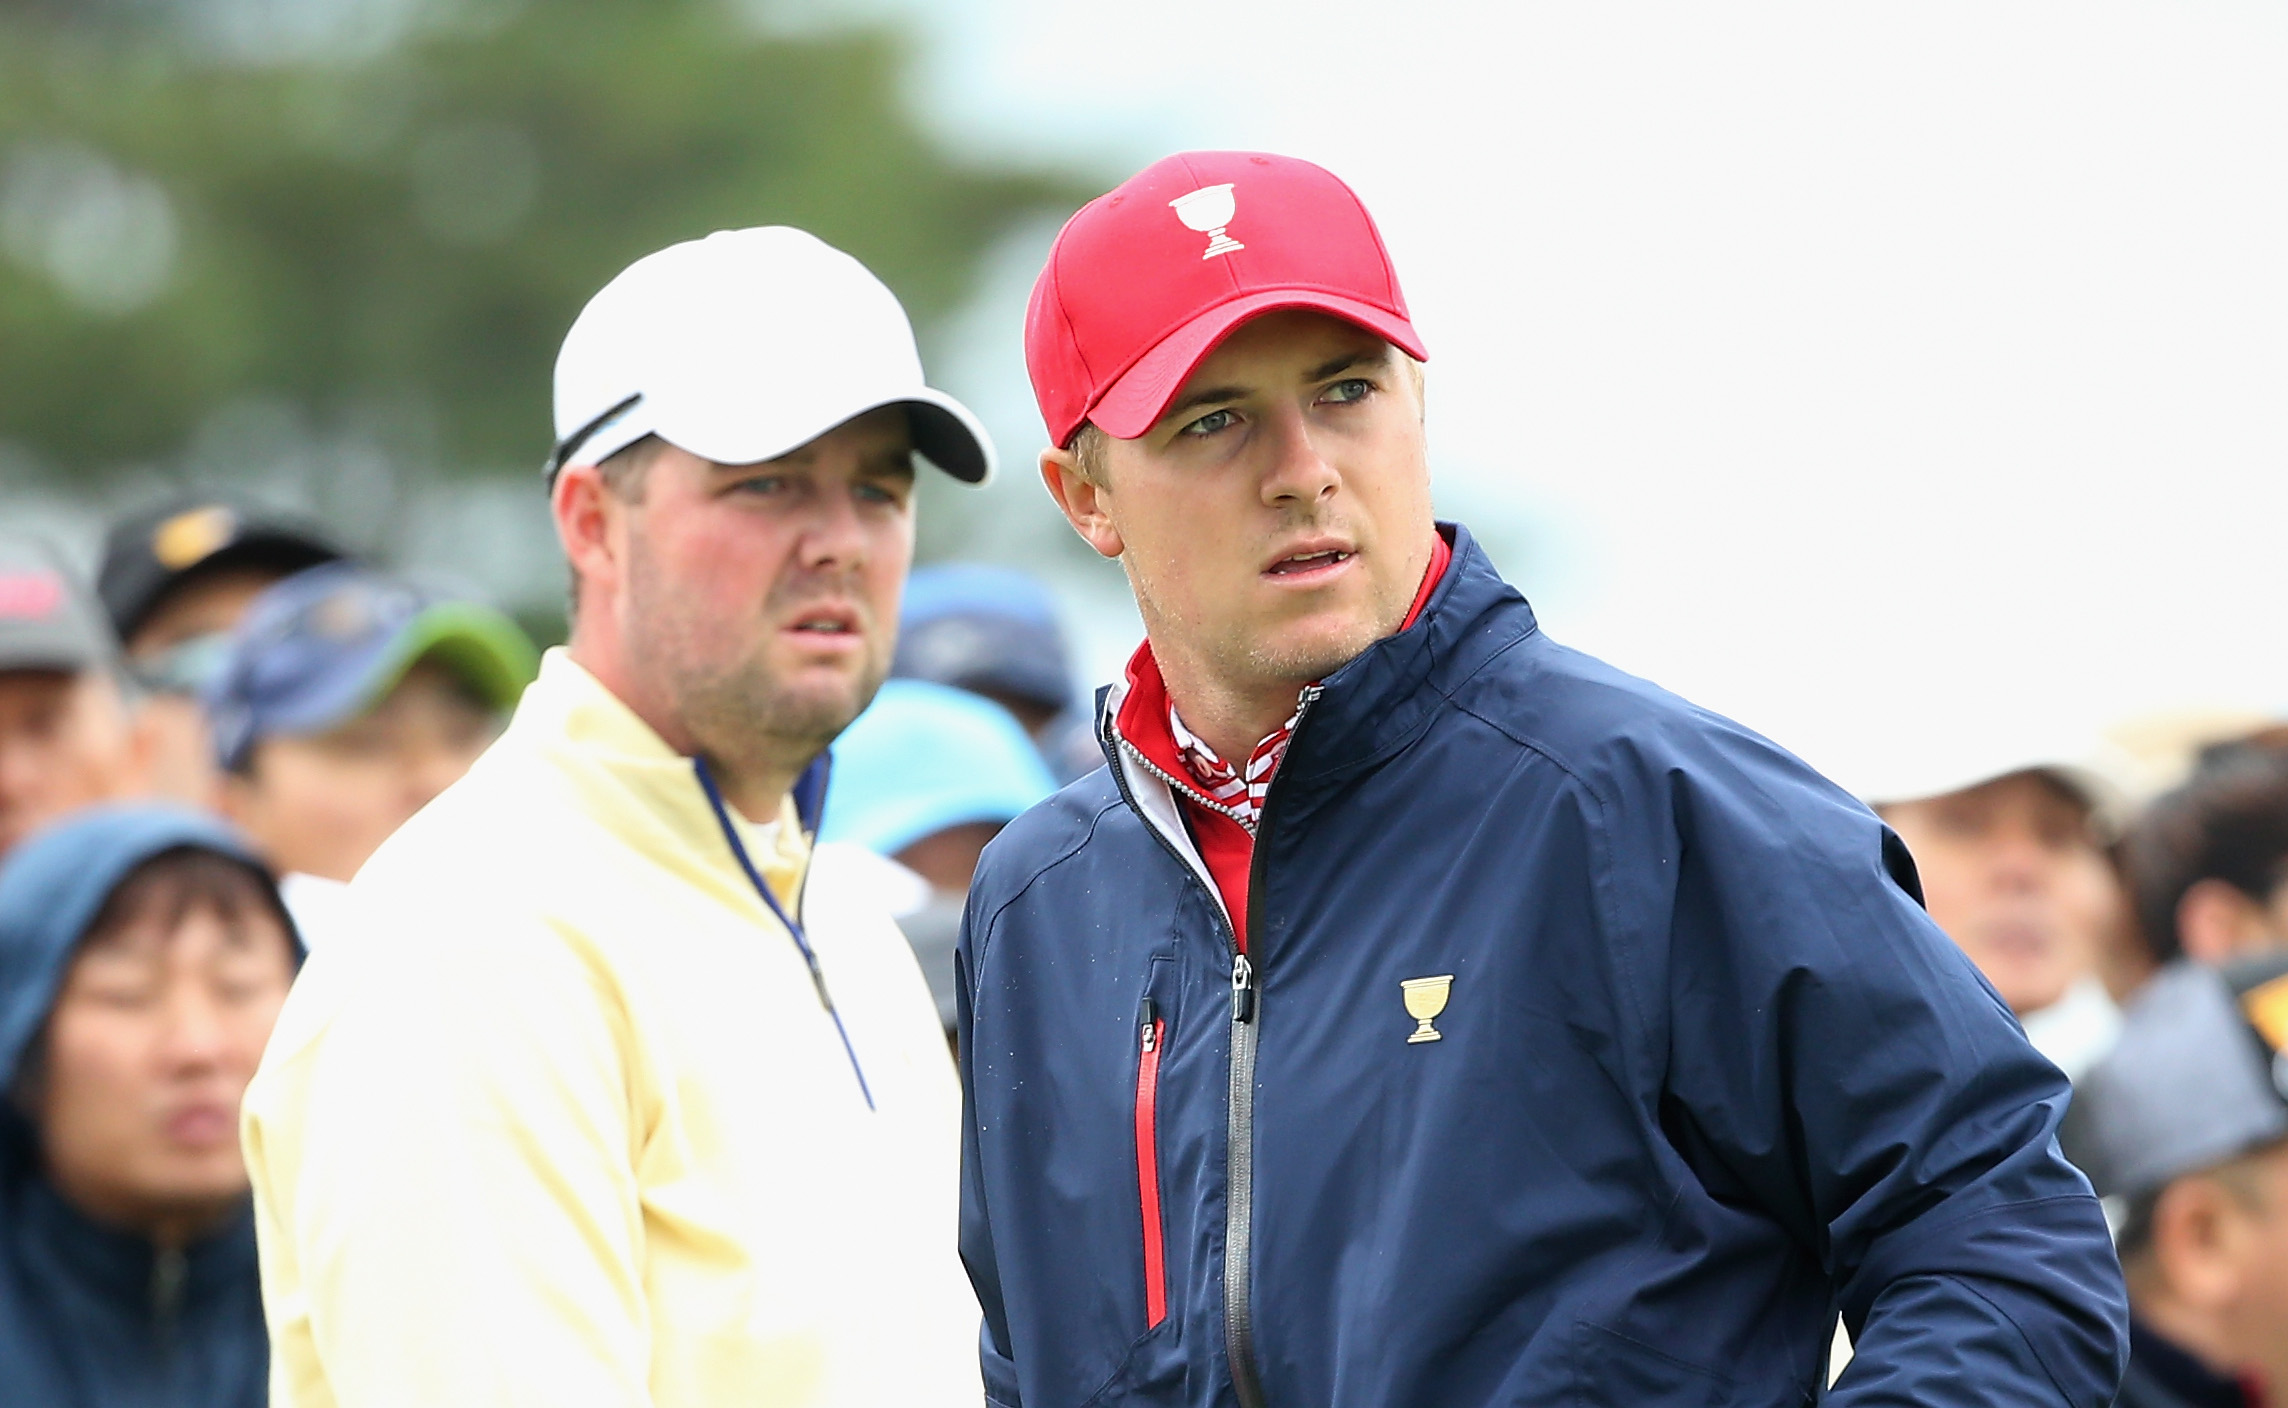 Jordan Spieth reveals the most underrated player in golf right now